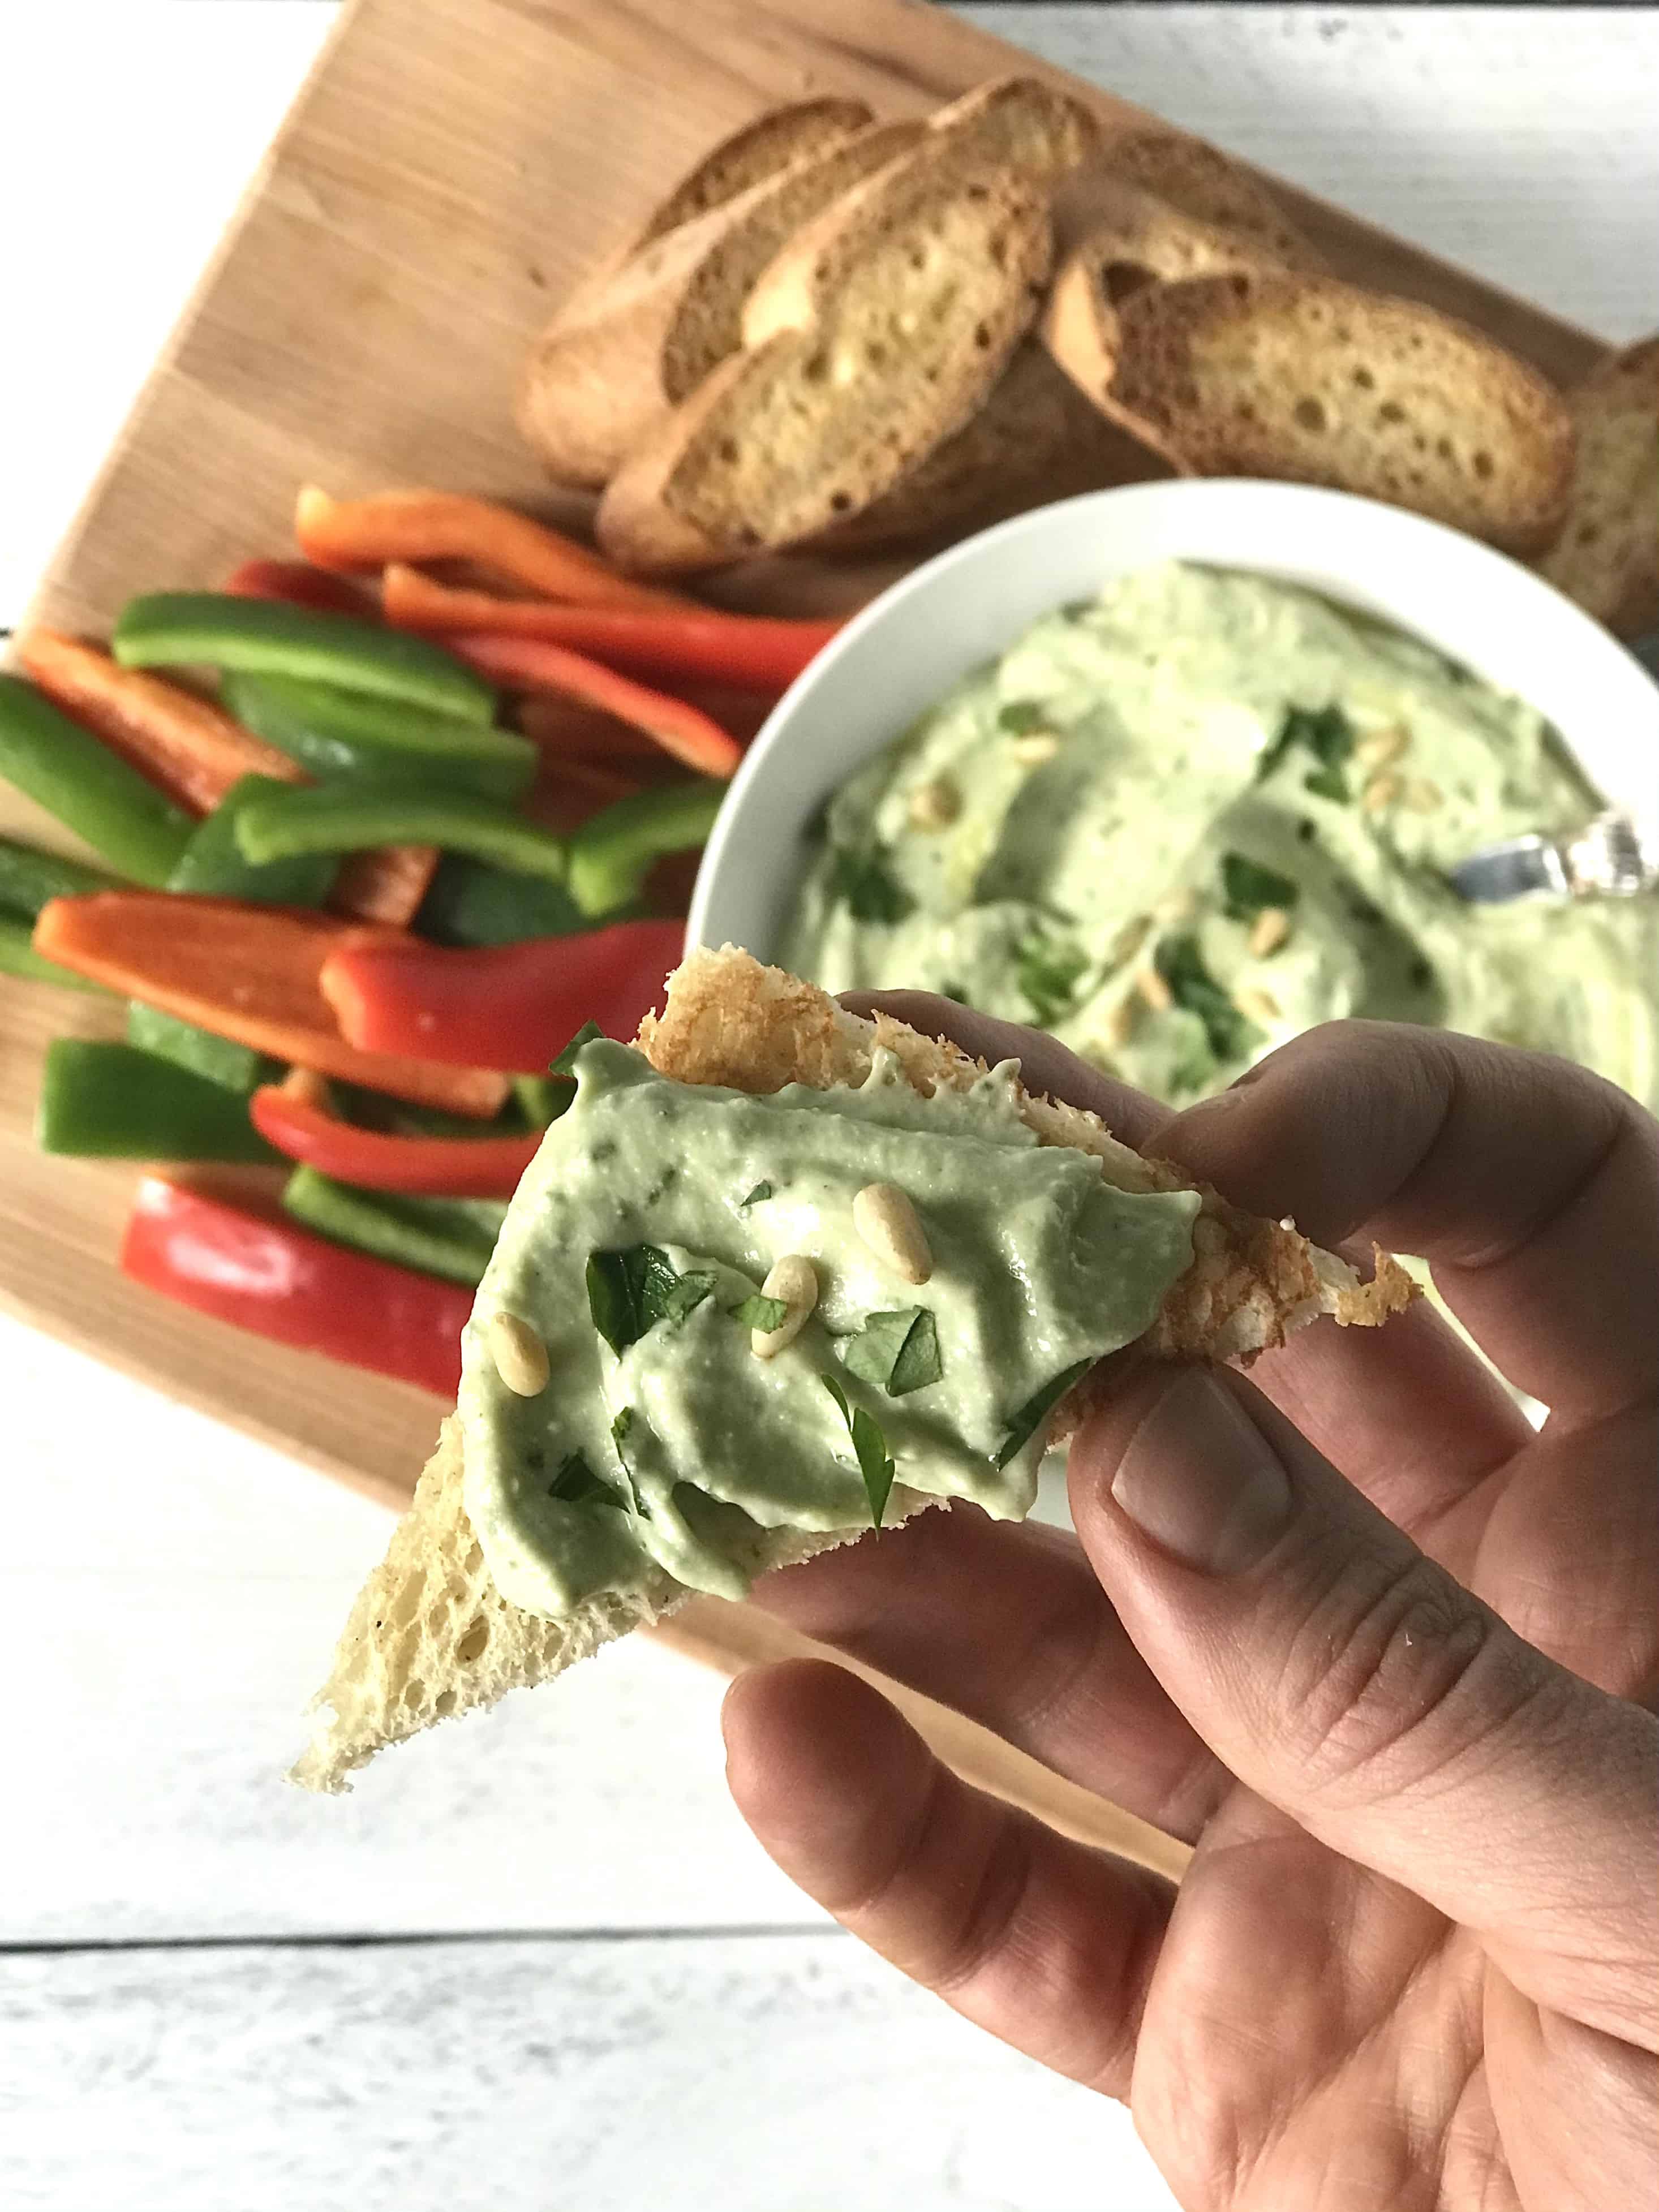 a hand holding up a toasted slice of bread cut into a triangle spread with a creamy pale green dip and topped with pine nuts and chopped parsley